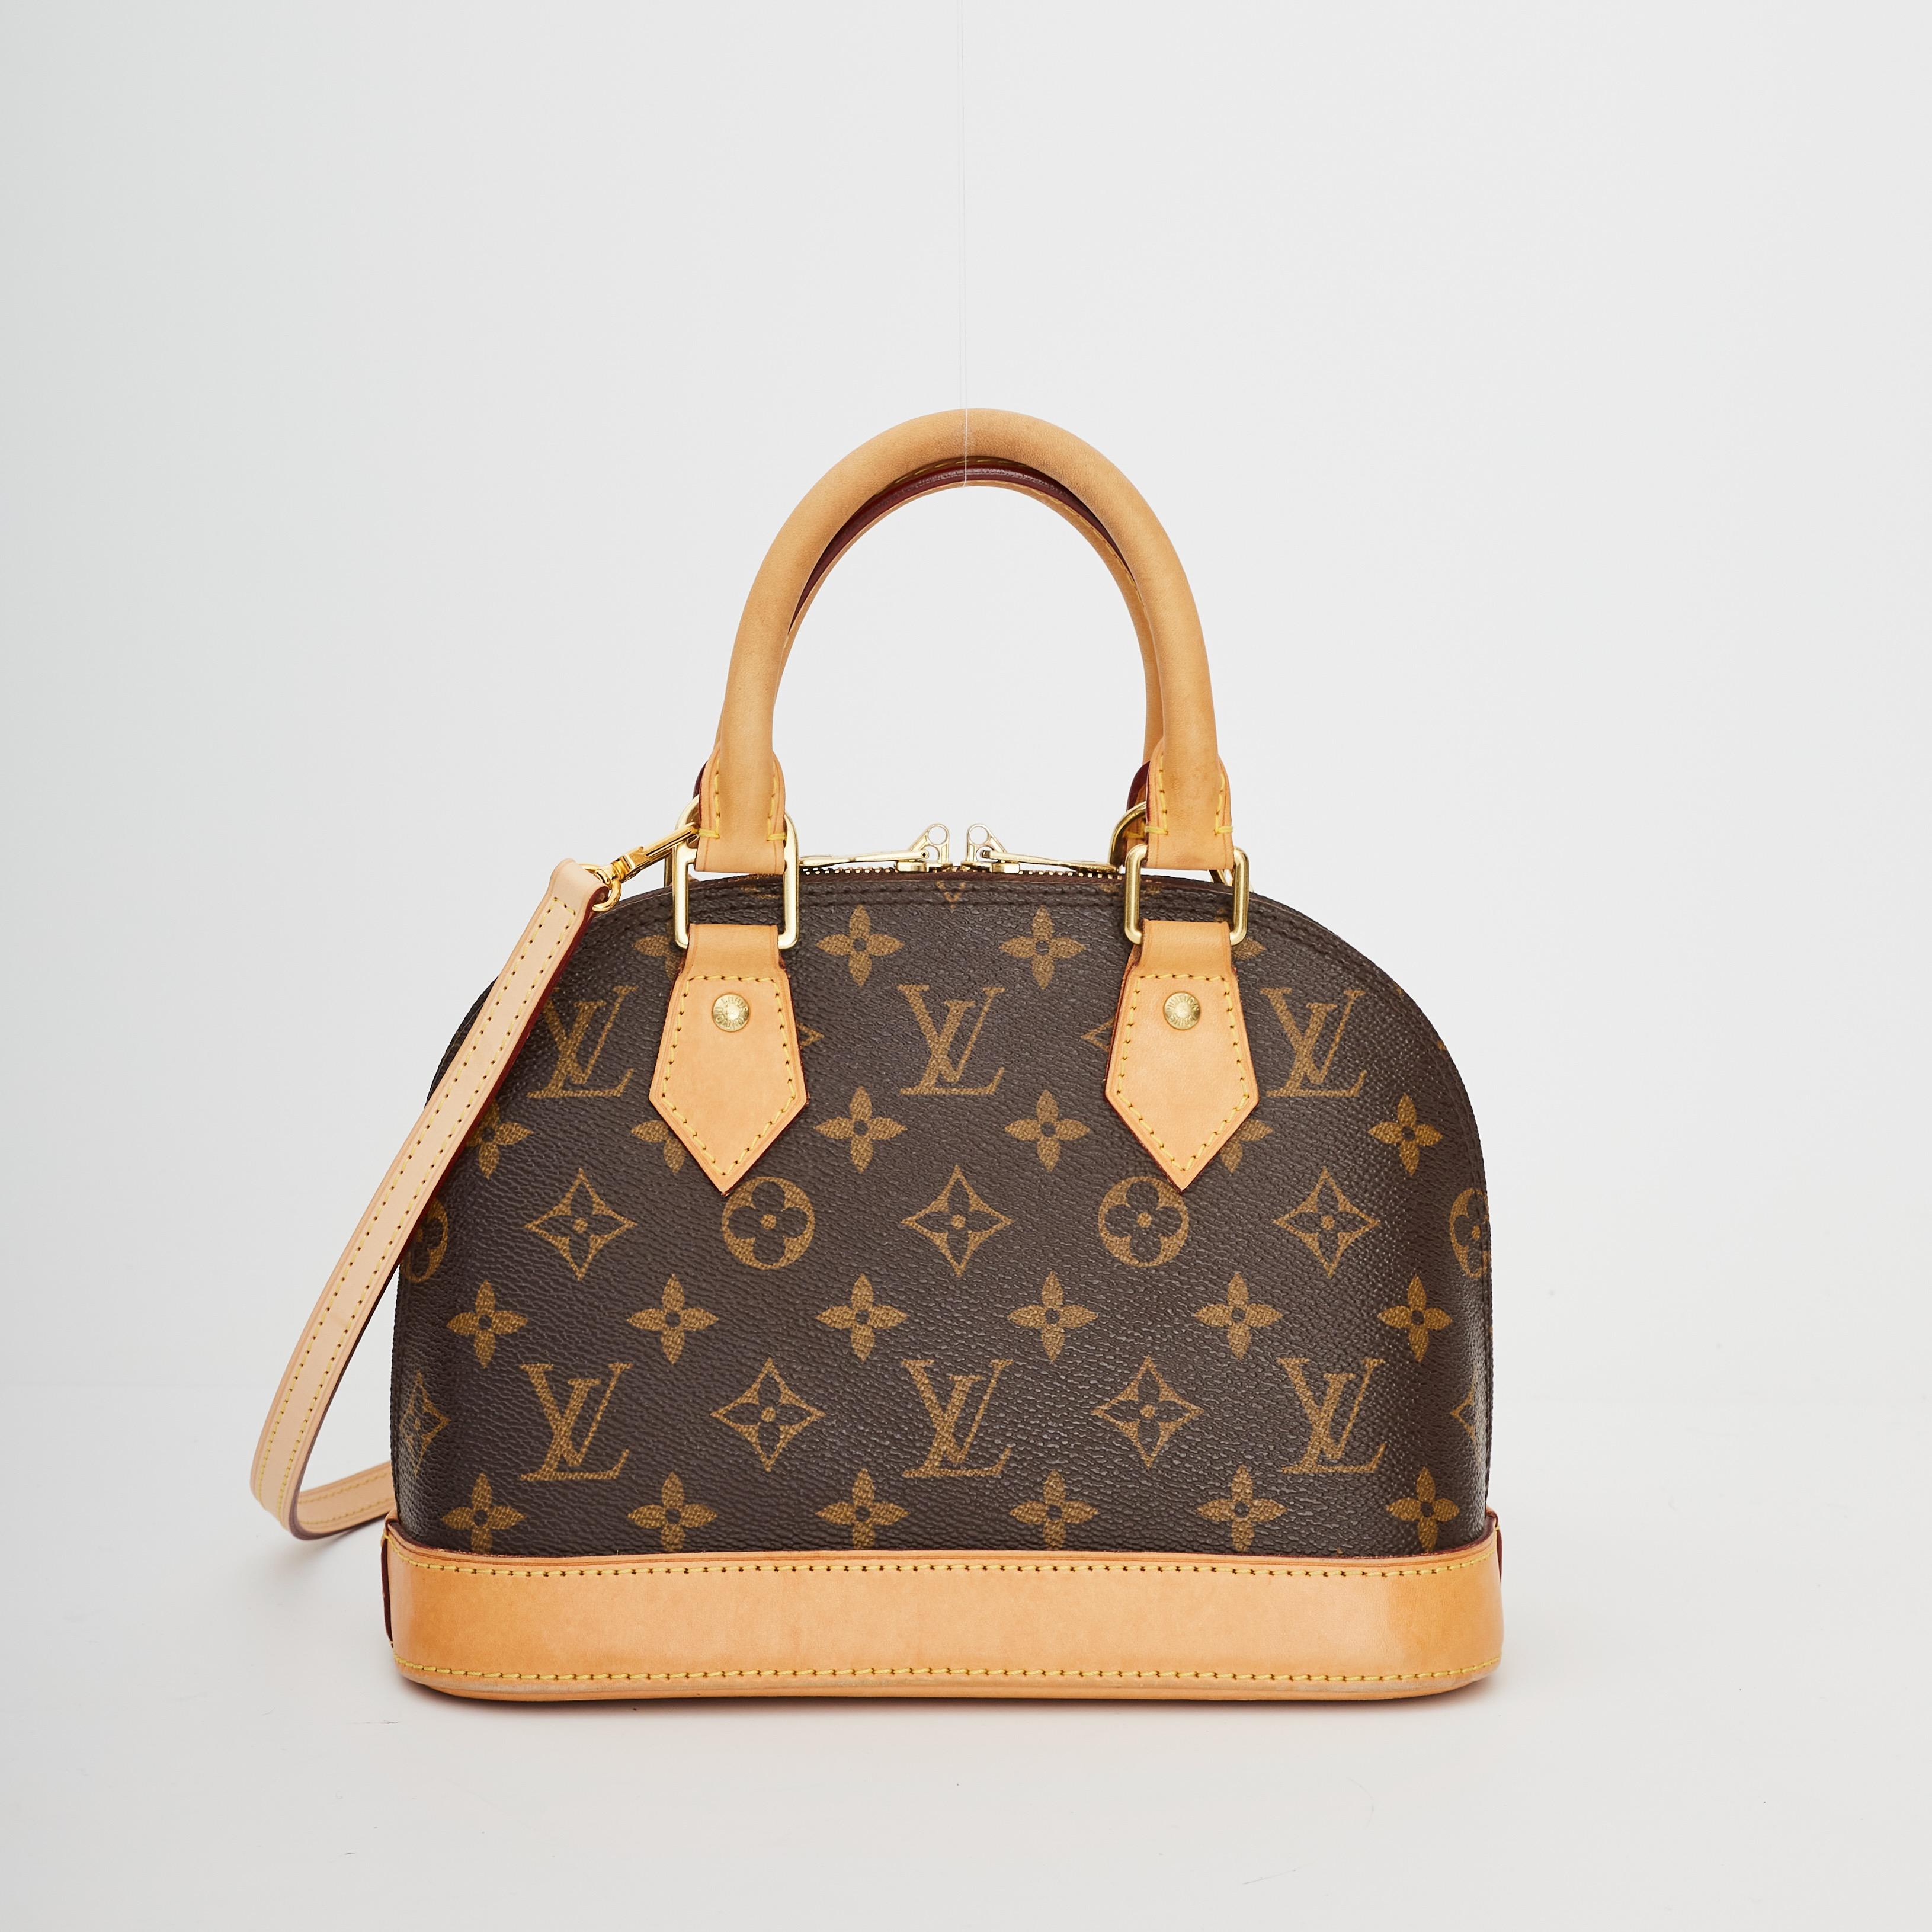 This small bag is made of Louis Vuitton monogram coated canvas. The bag features vachetta cowhide leather trim including a solid base, rolled leather top handles, and optional shoulder strap, and brass hardware. The top zippers open to a fabric